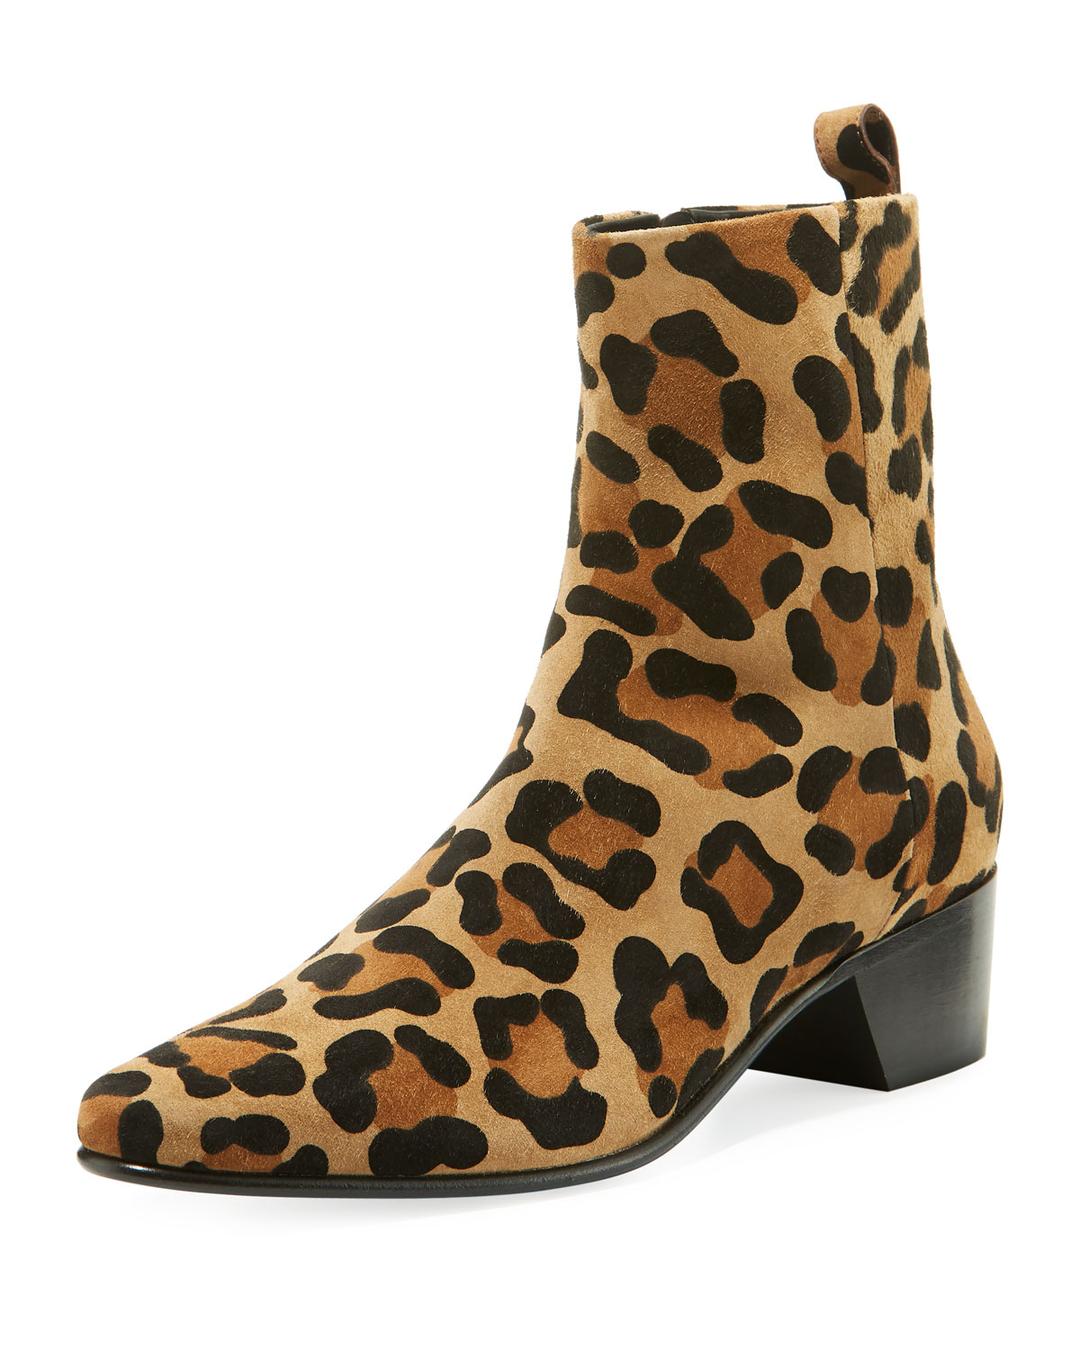 The Leopard-Print Ankle Boot Trend Is Happening | Who What Wear